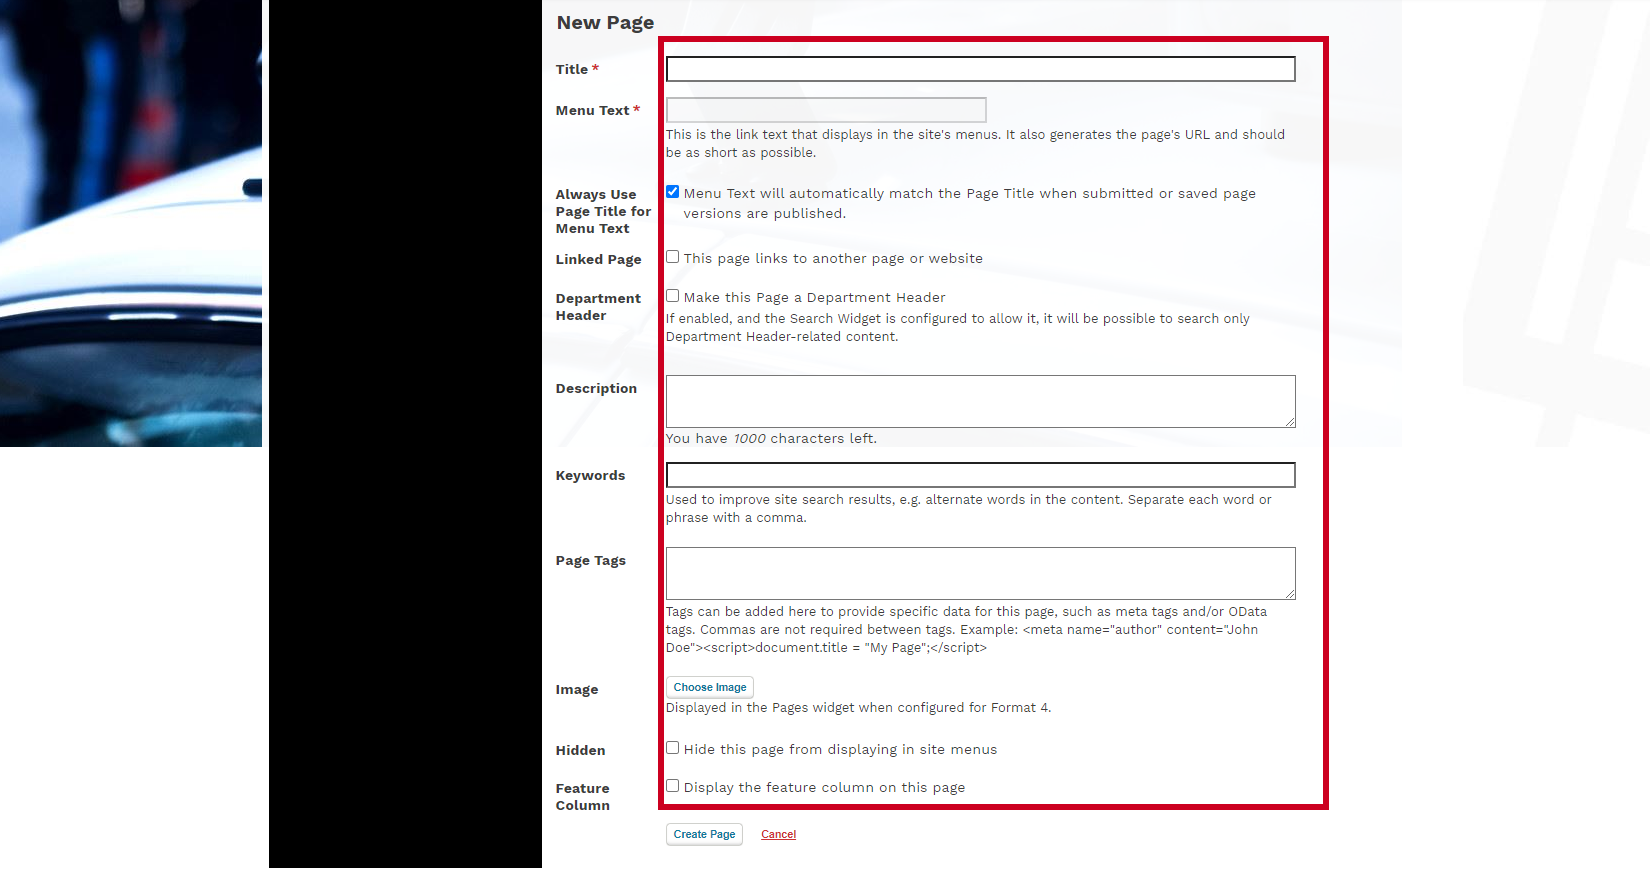 Web Central Create/Add Page Dialog Box and fields.